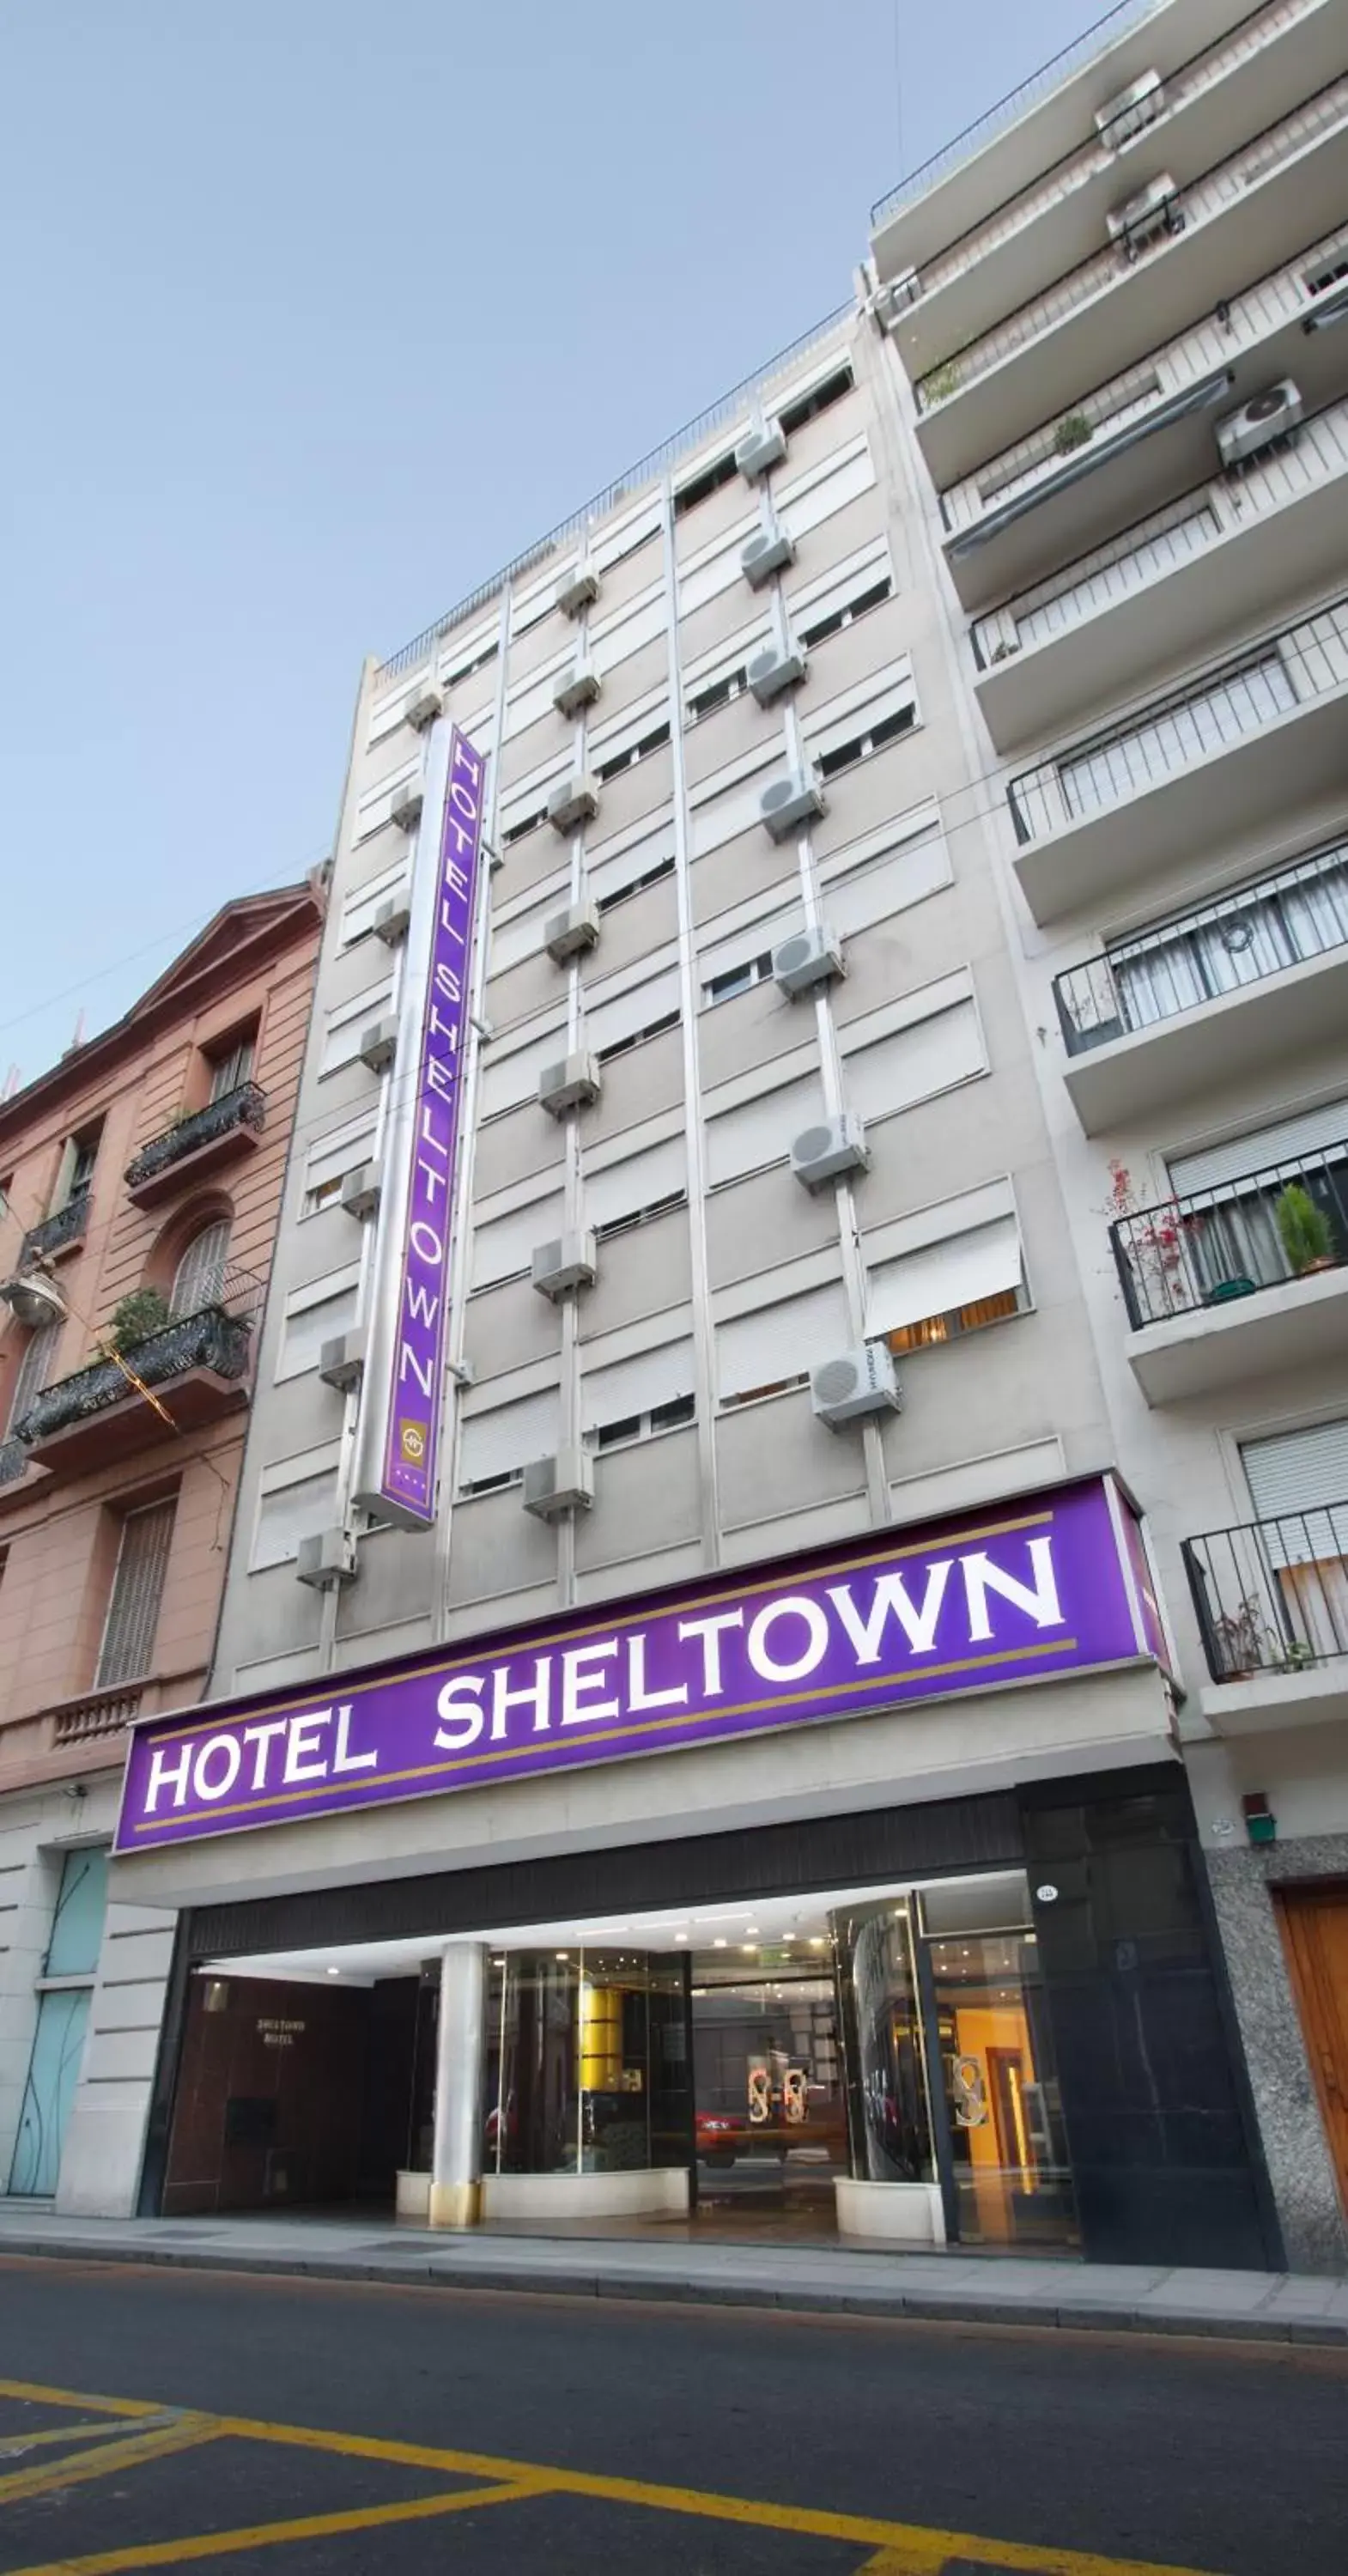 Property Building in Hotel Sheltown